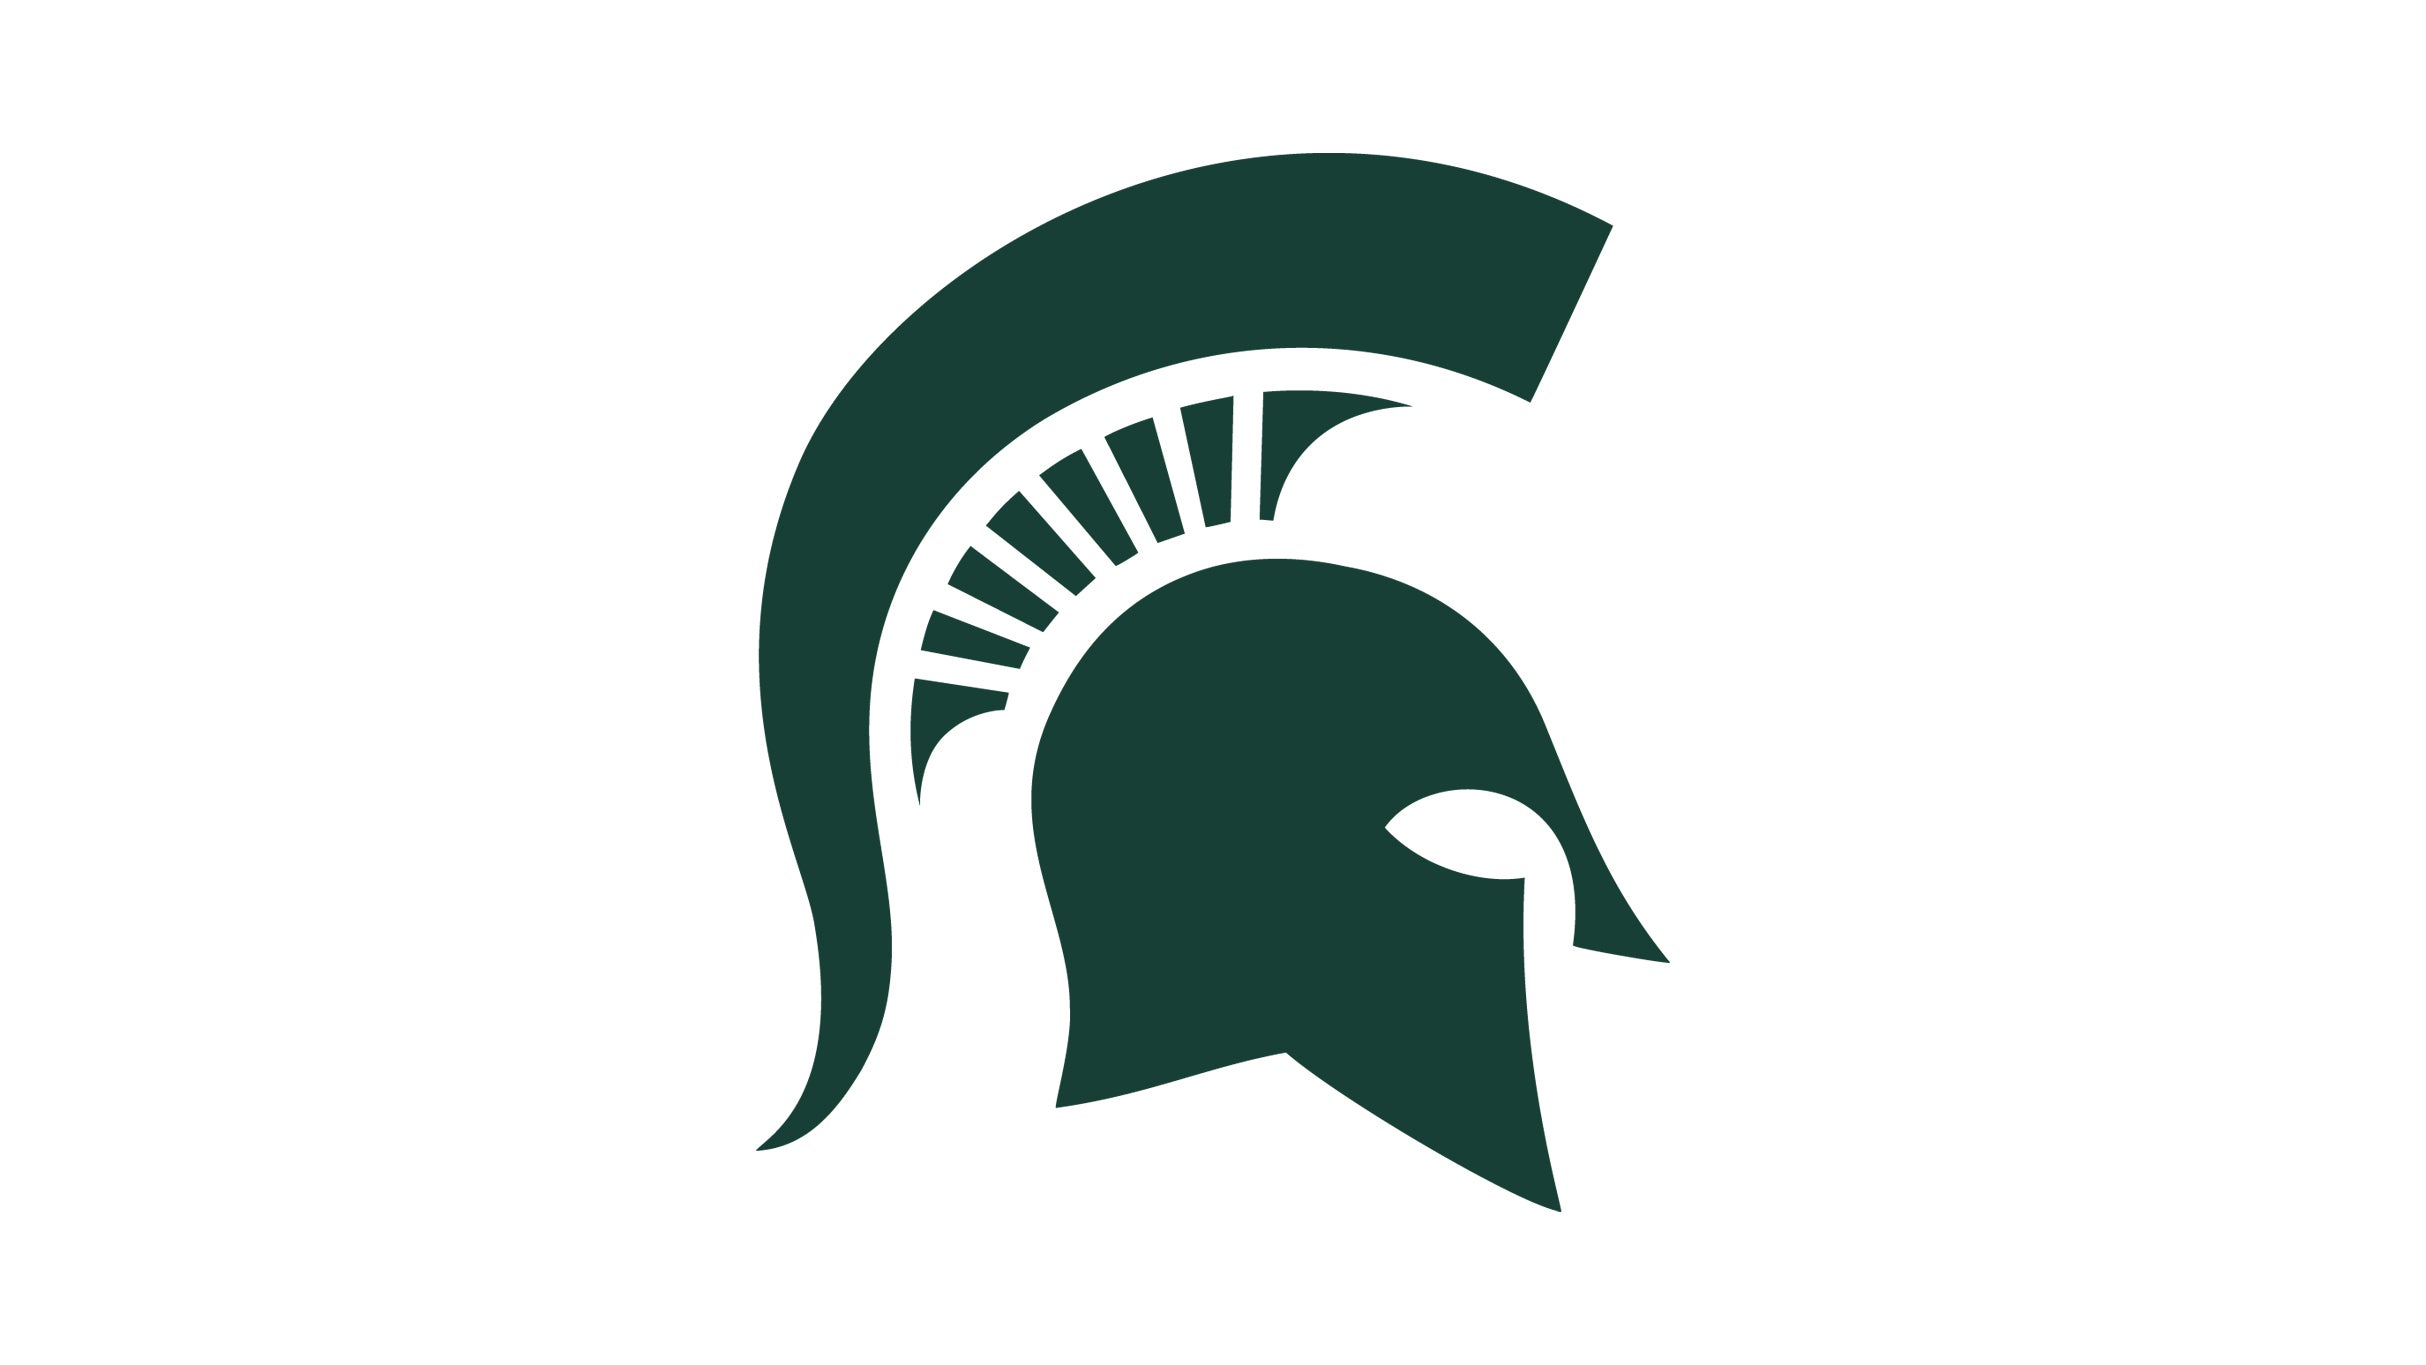 Michigan State Spartans Football vs. Prairie View A & M Panthers Football hero